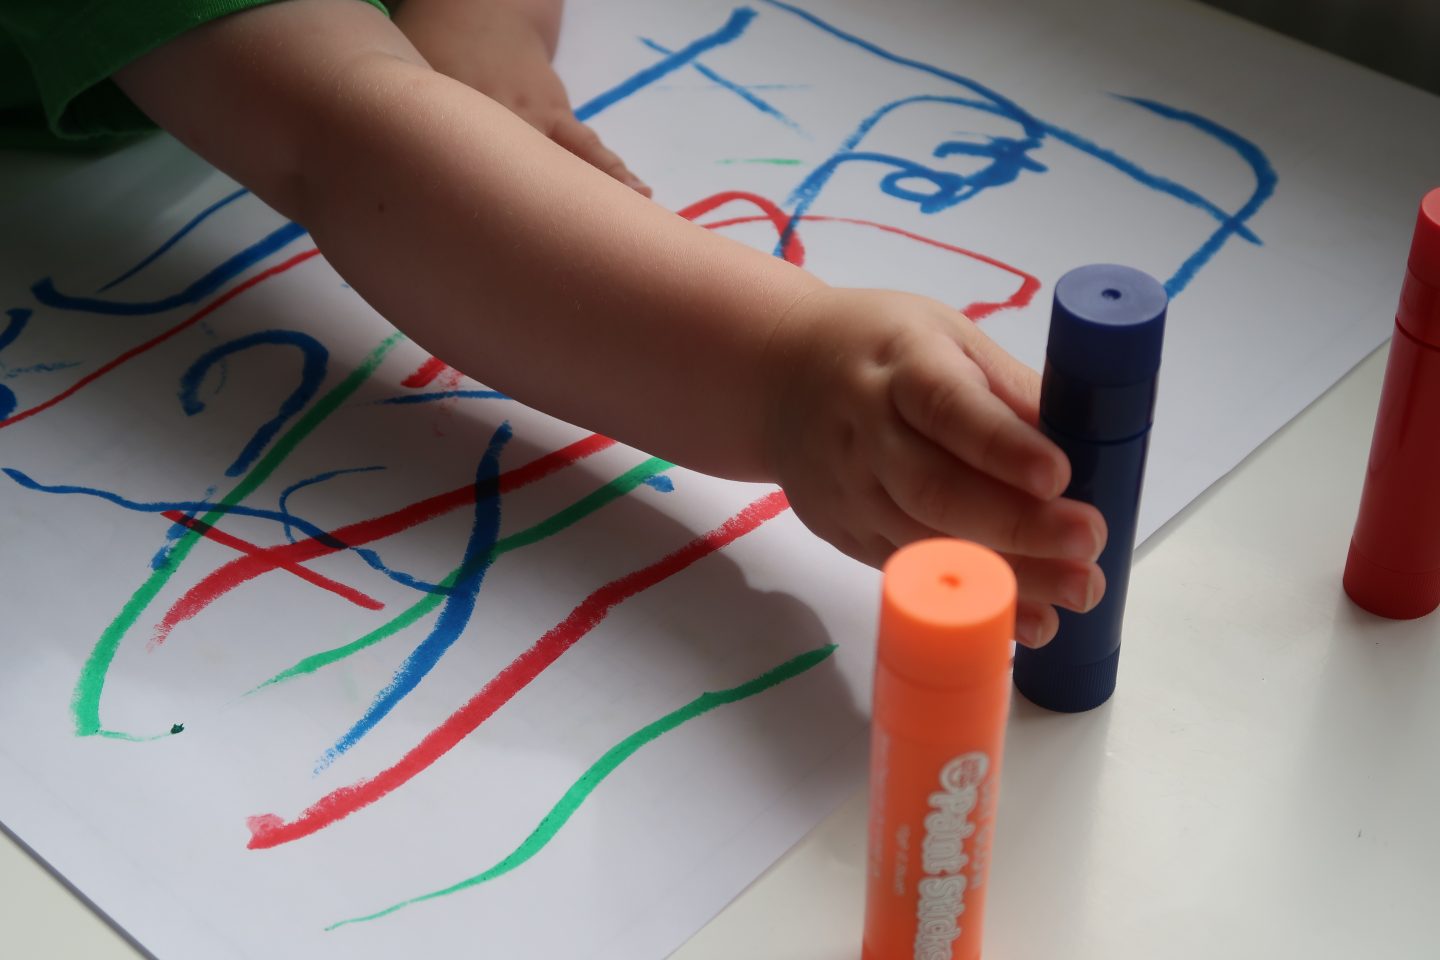 A toddlers hand reaching for a paint stick